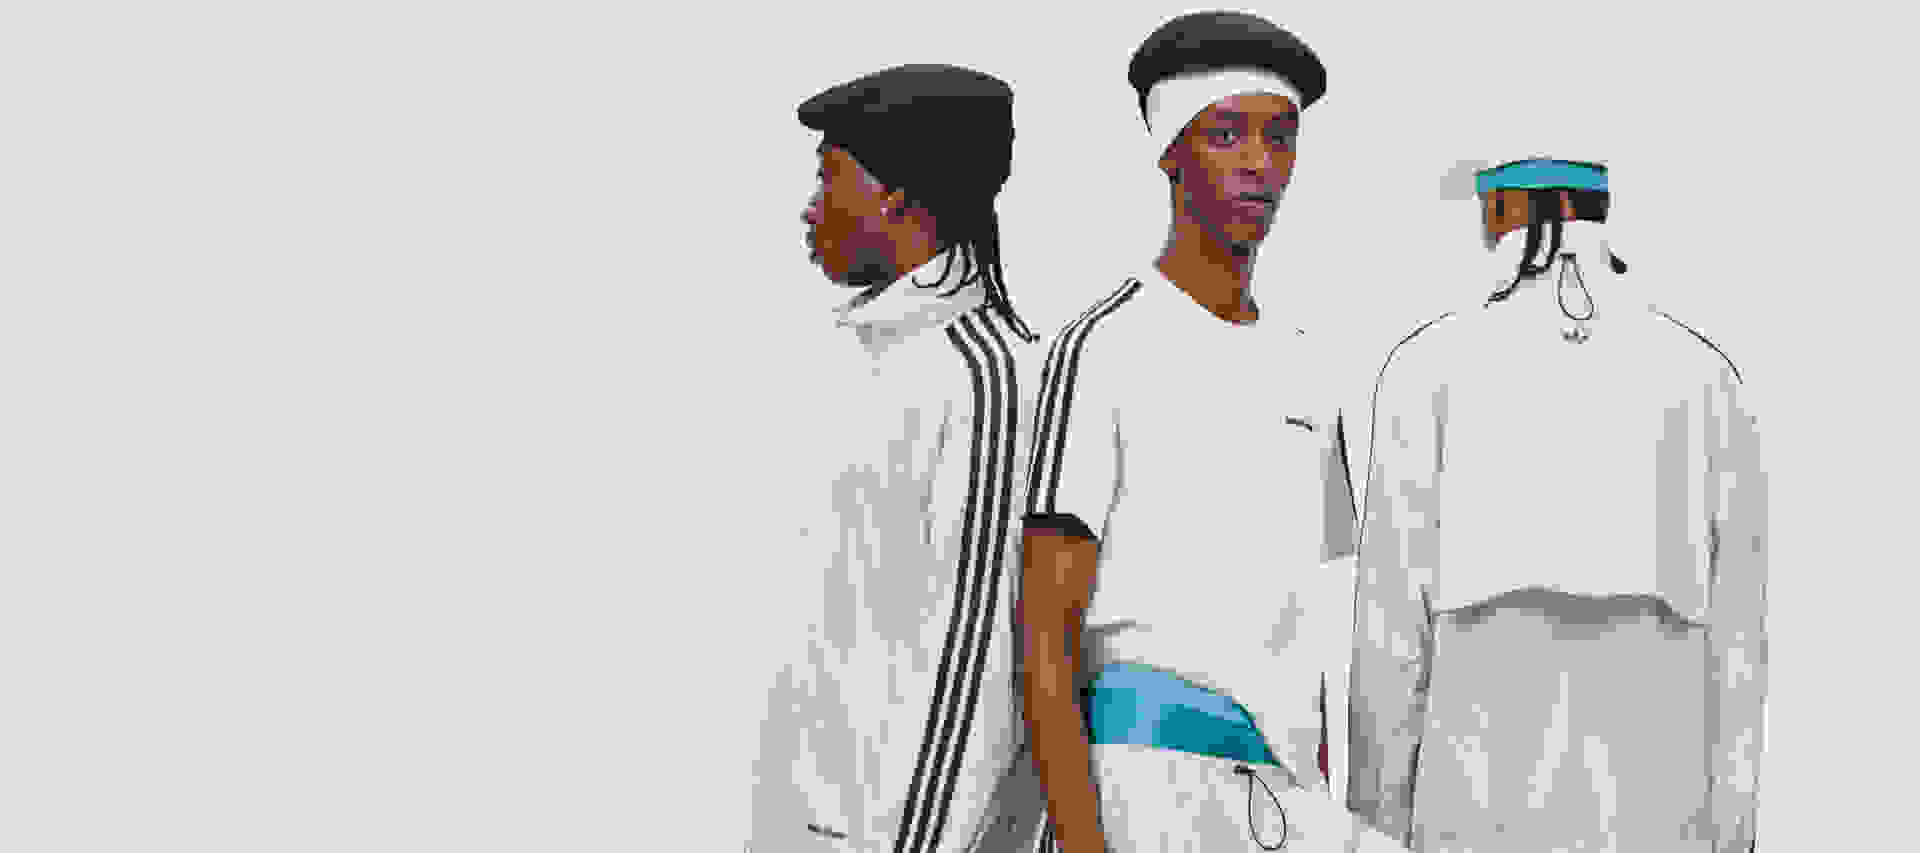 Three models are posing against a white background, all wearing white outfits from the adidas Originals by Wales Bonner collection.